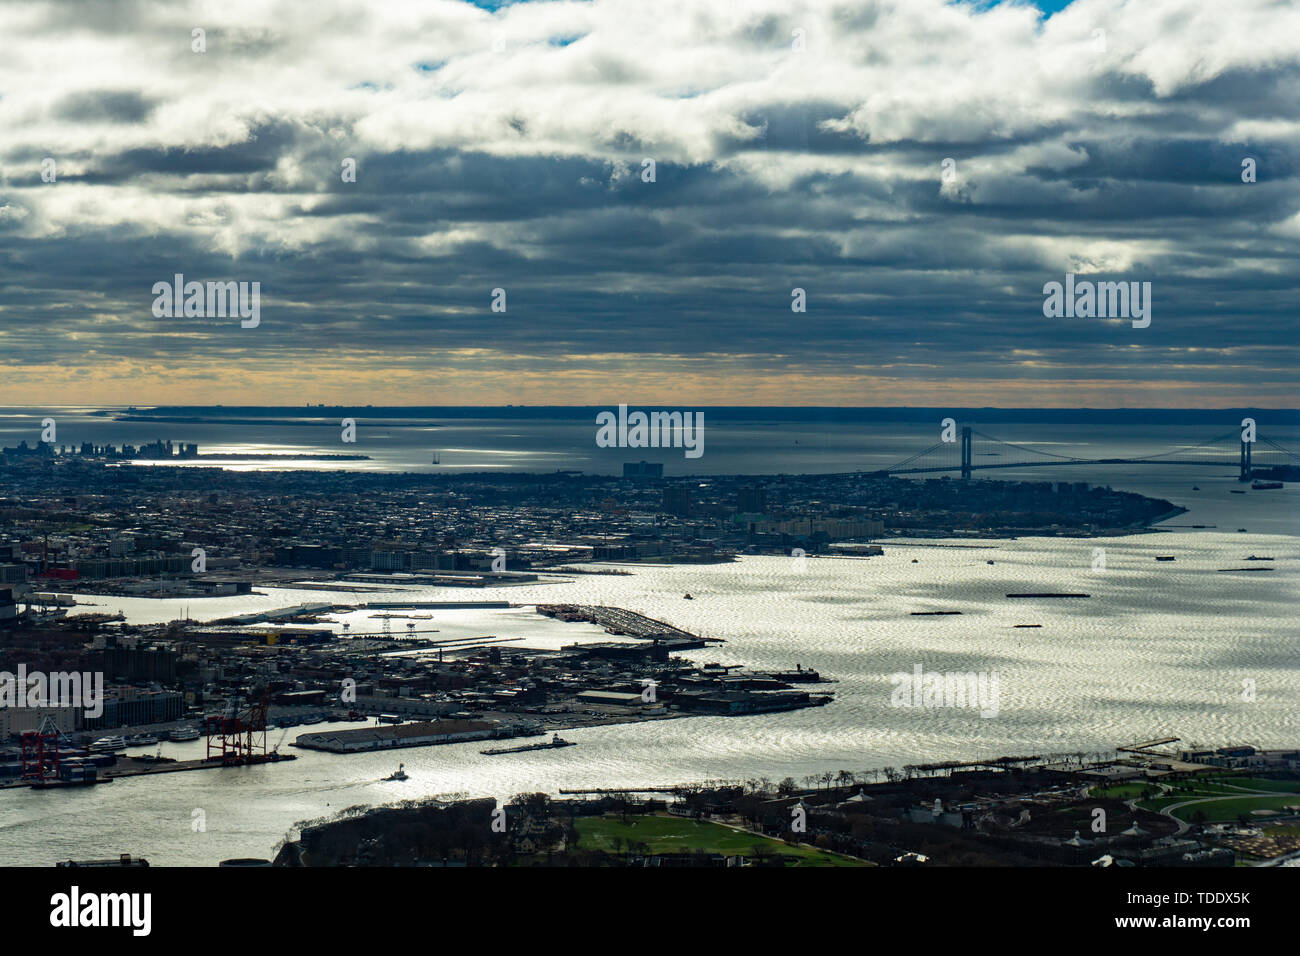 Aerial view of Manhattan skyline from the sky on a cloudy day, New York City. Stock Photo